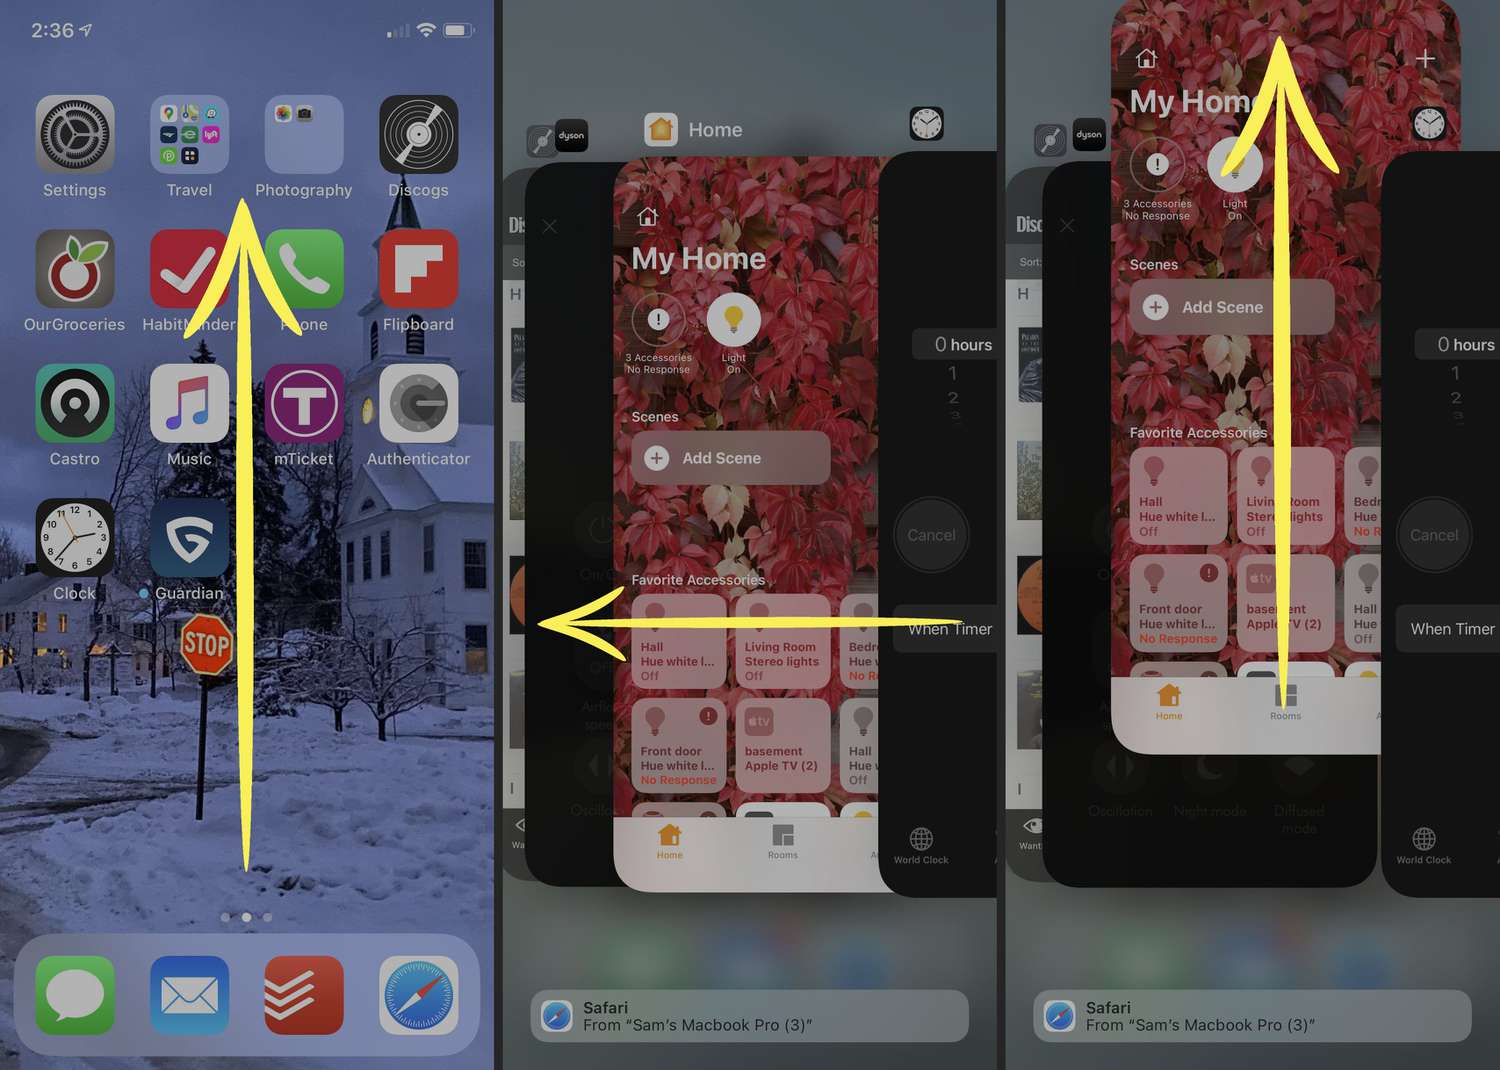 gesture-navigation-swiping-up-on-iphone-10